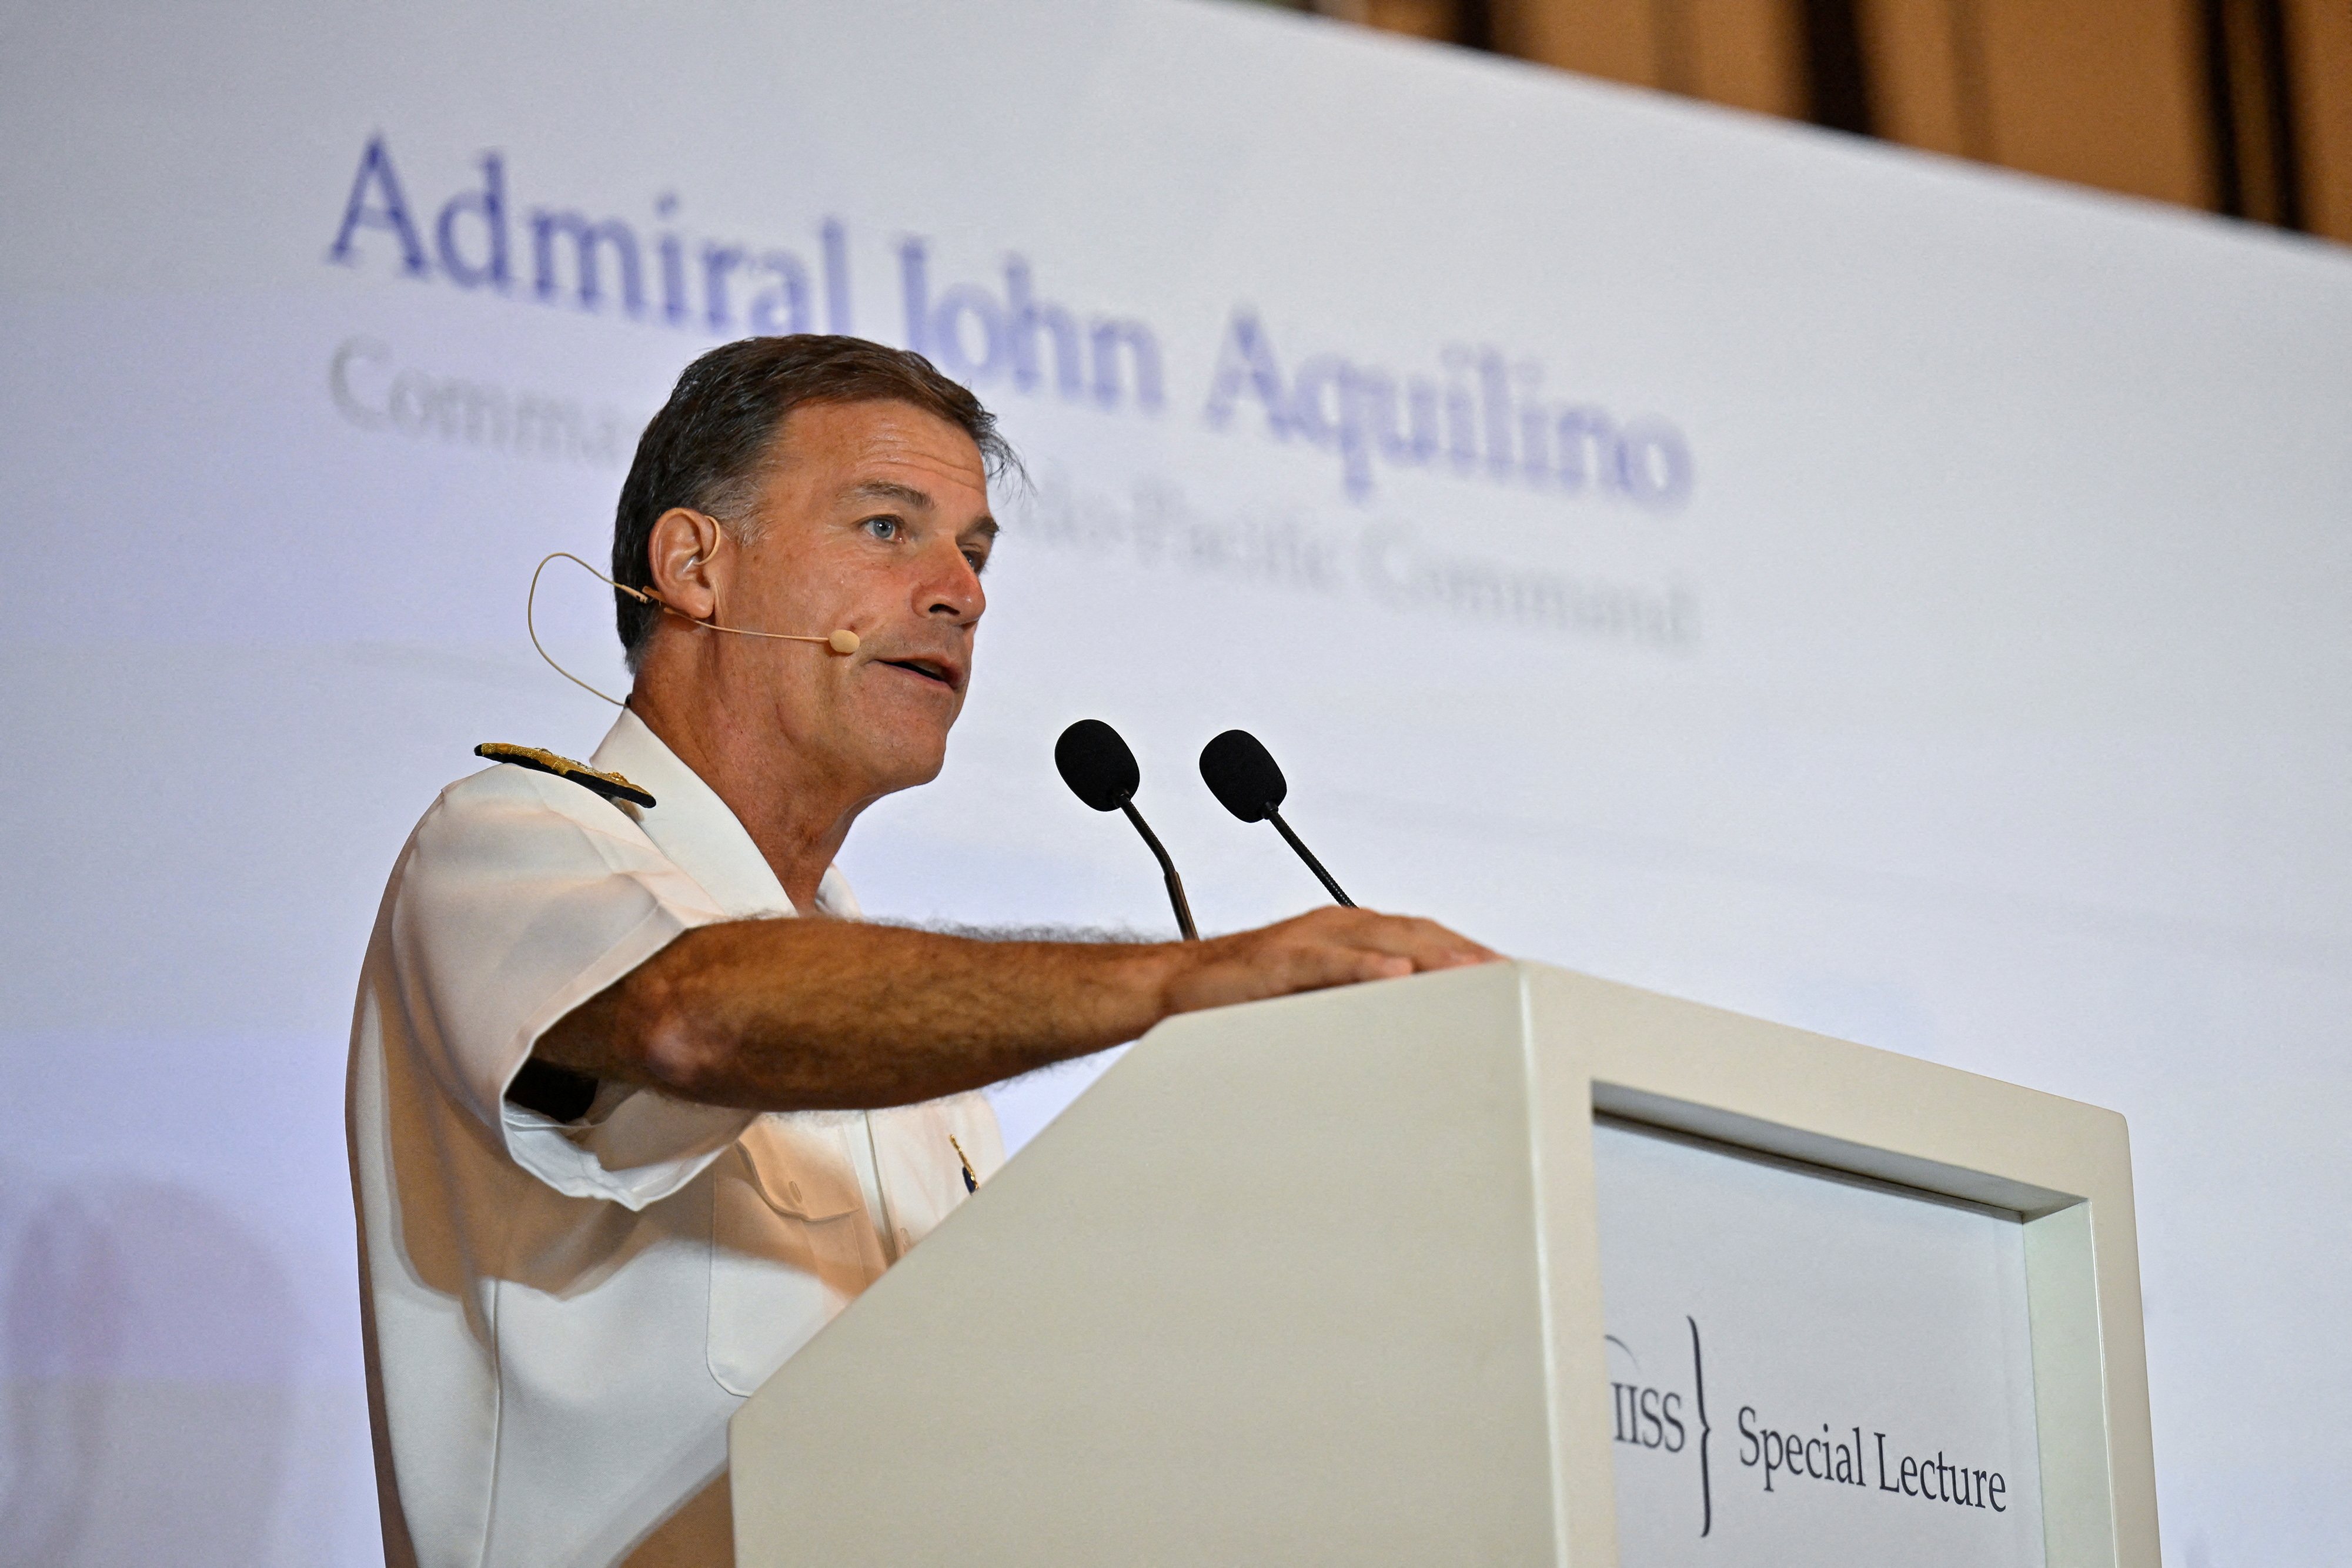 Admiral John C. Aquilino, Commander of the United States Indo-Pacific Command speaks at the IISS Special Lecture in Singapore